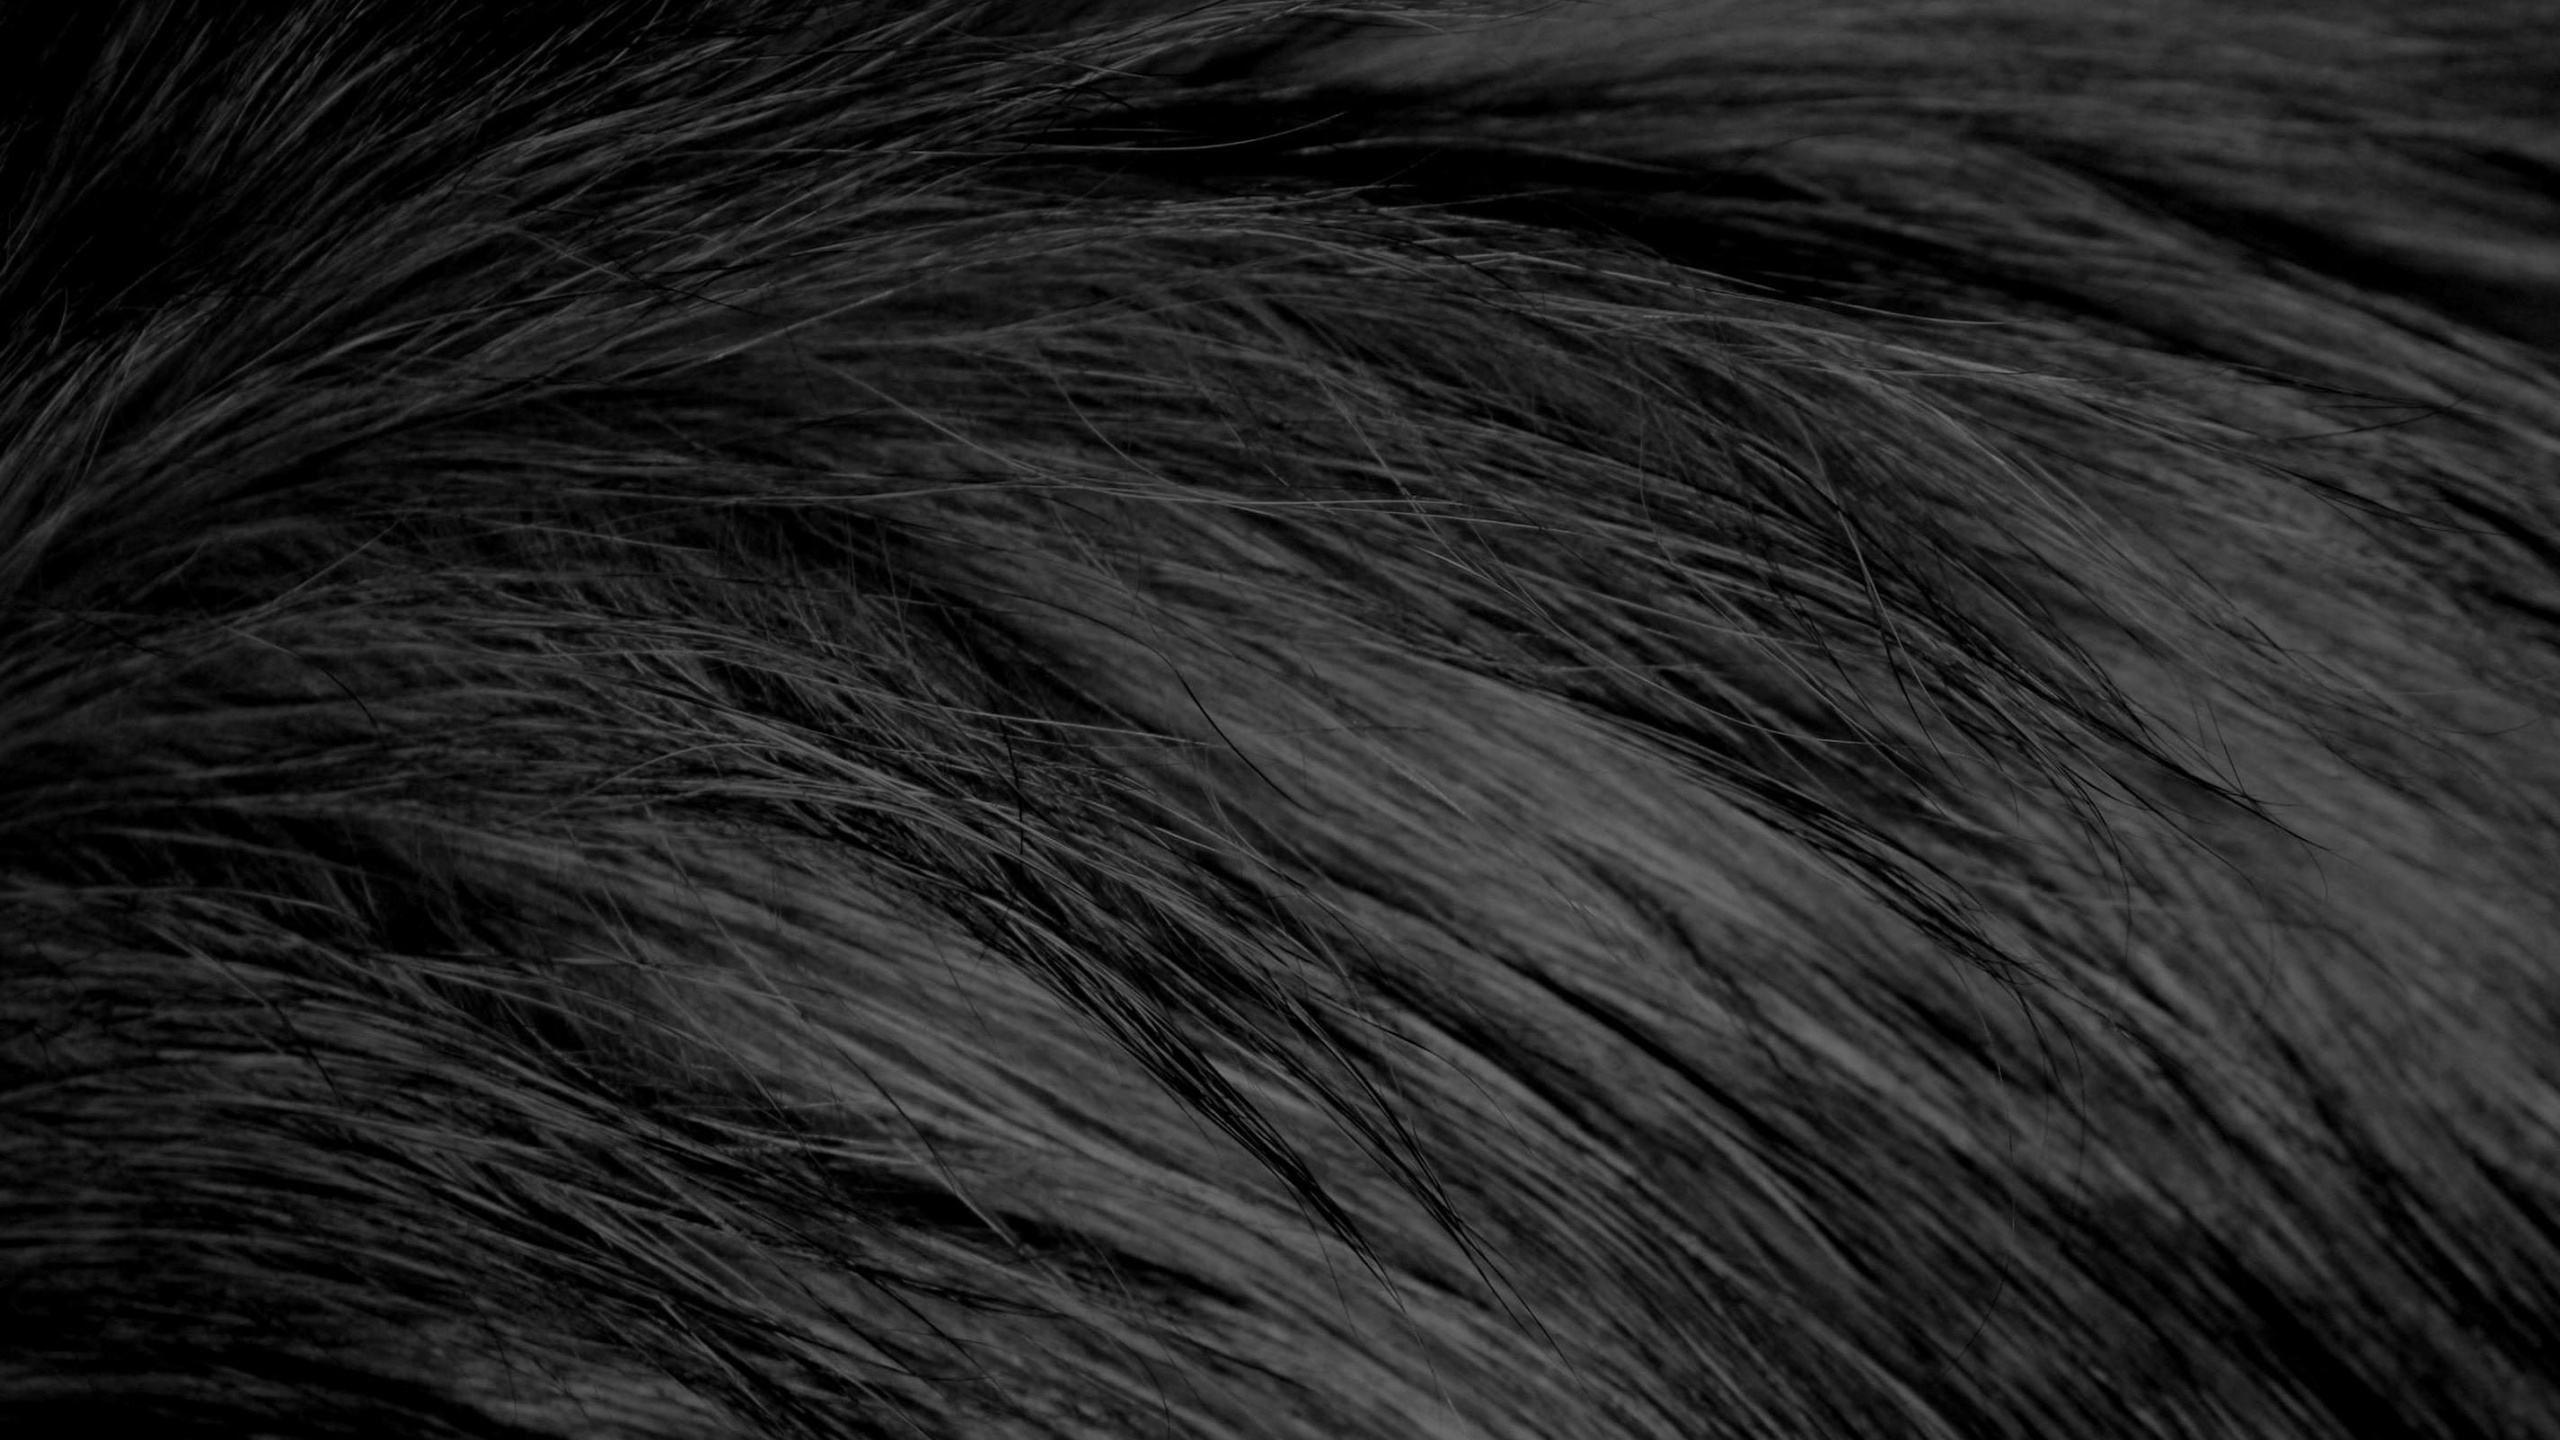 Cheveux Humains Noirs et Blancs. Wallpaper in 2560x1440 Resolution